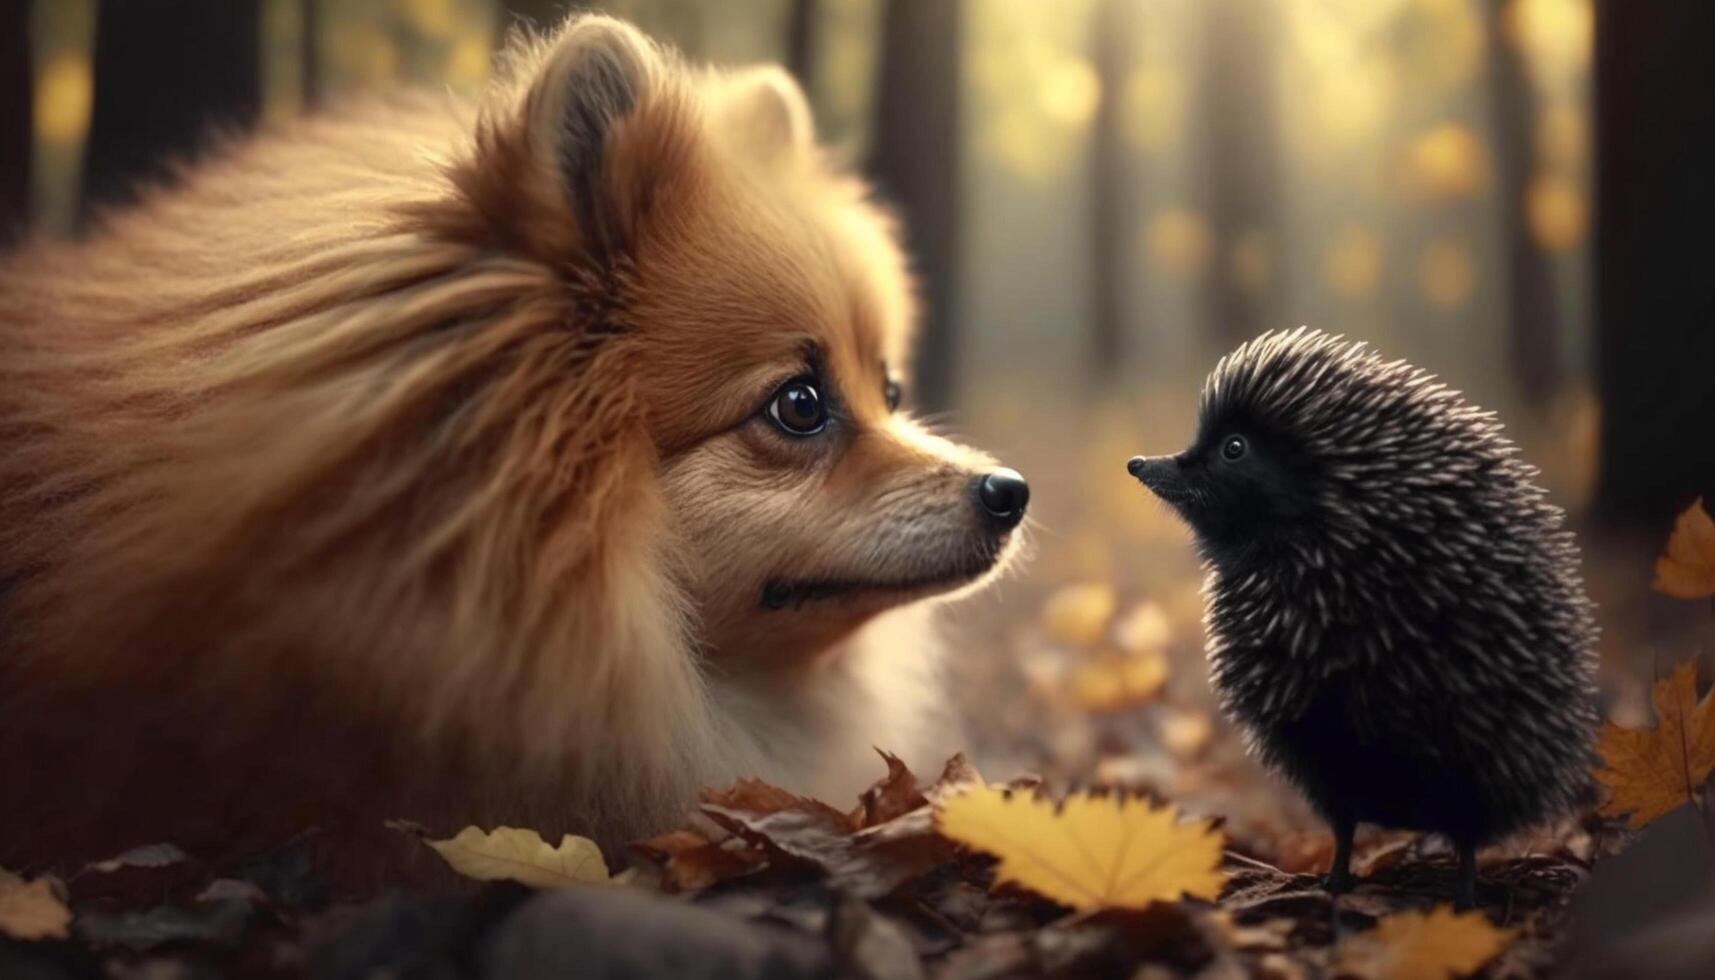 Adorable Pomeranian dog and a little hedgehog sniffing each other in autumn photo